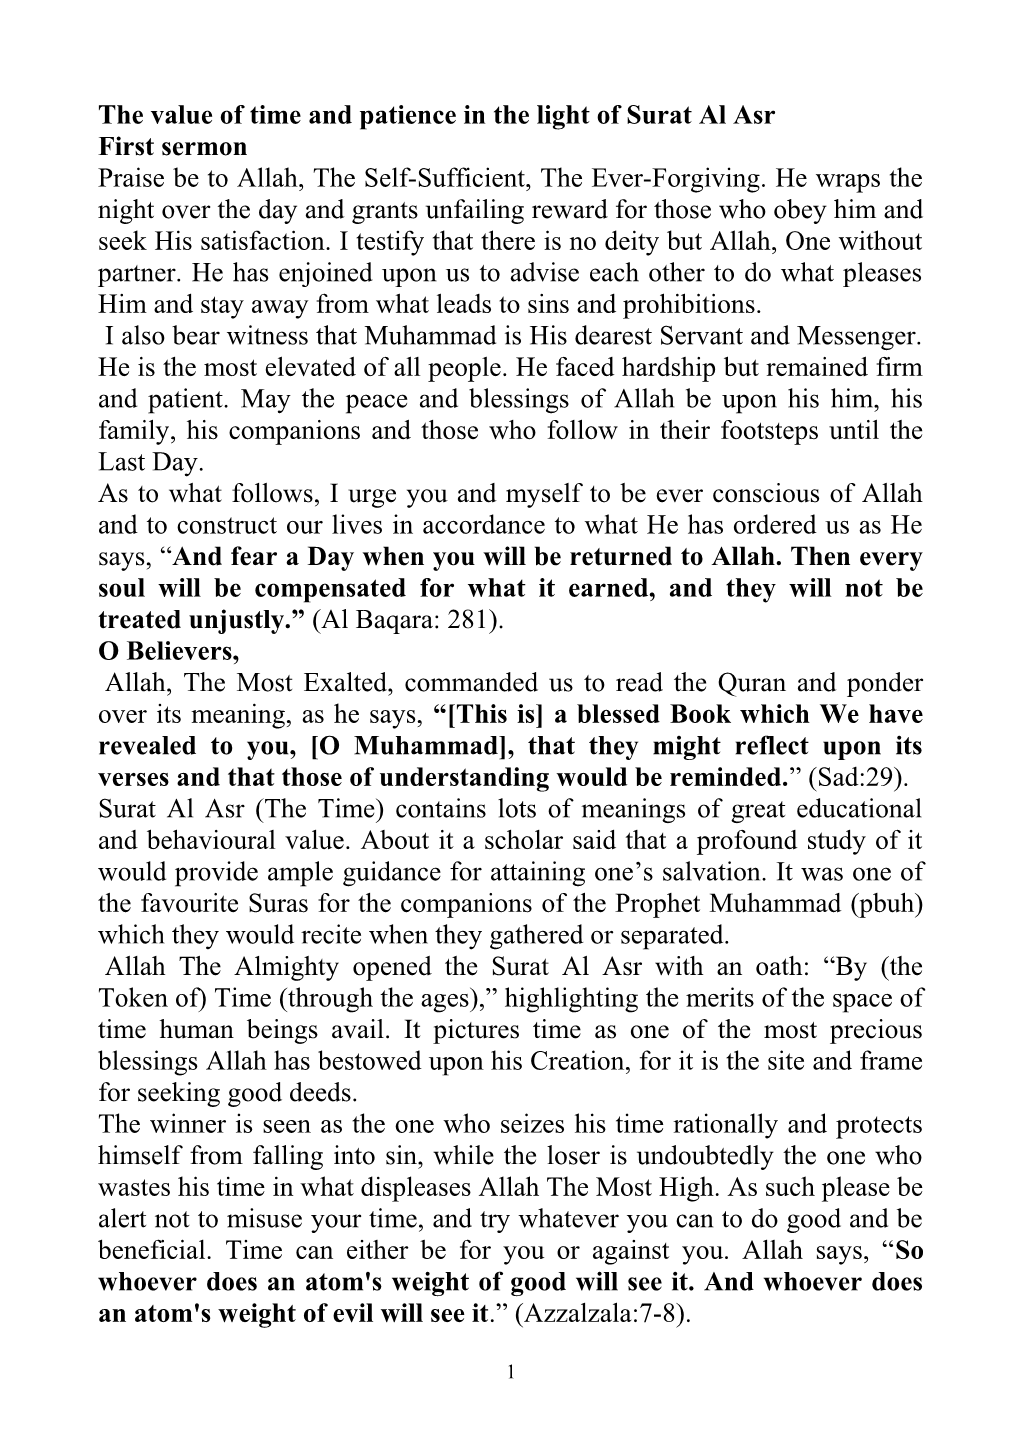 The Value of Time and Patience in the Light of Surat Al Asr